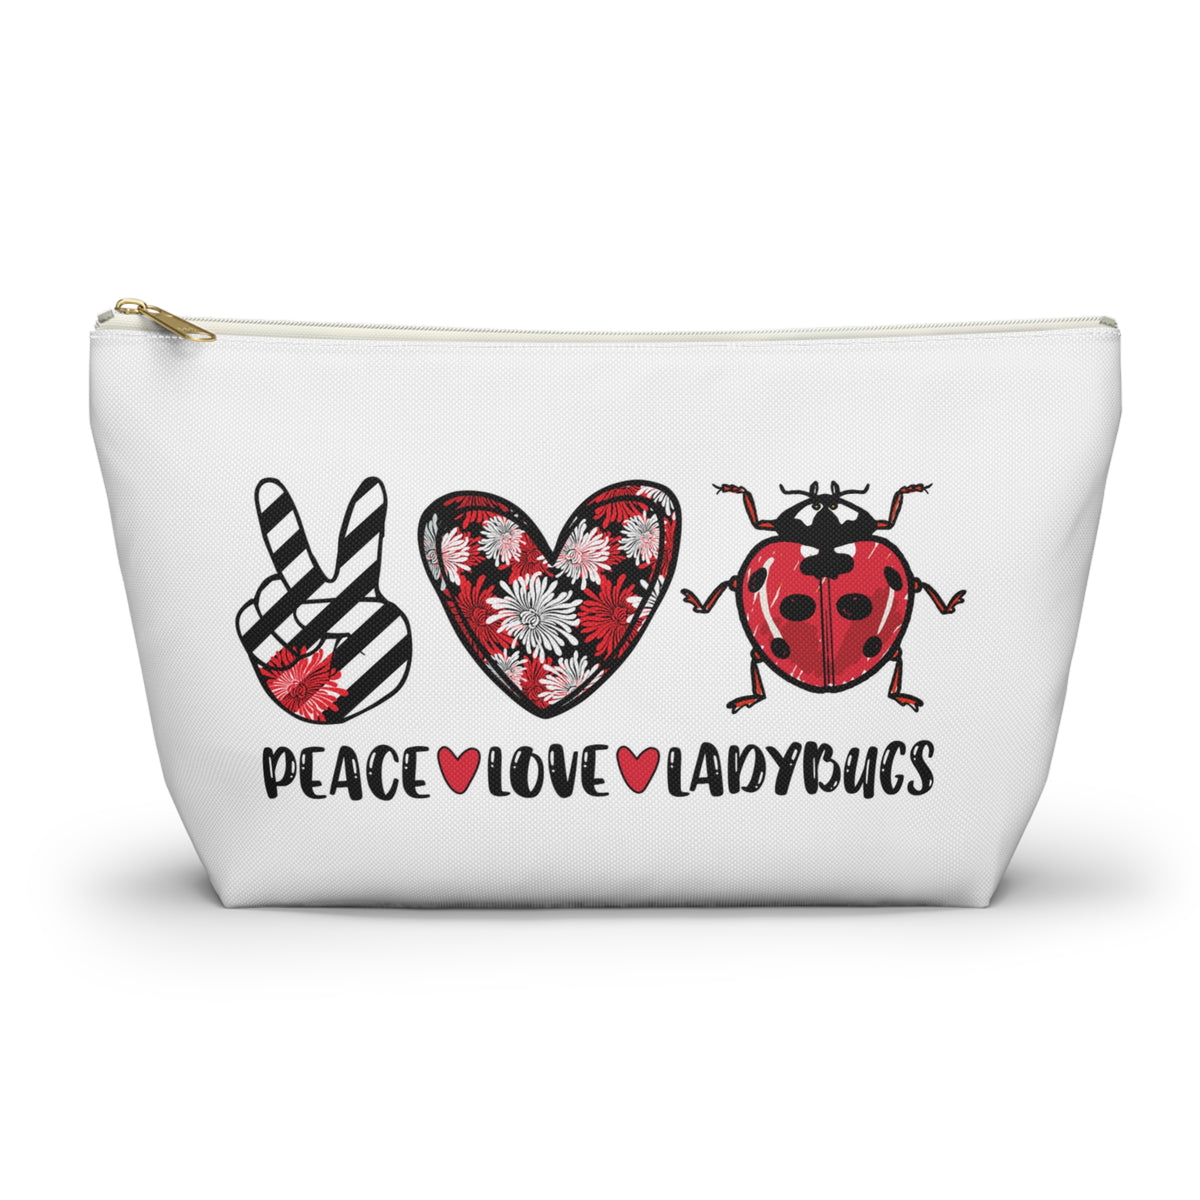 Peace Love Ladybug Gifts, Cute Makeup Bag, Lady Bug Make Up Bag, Accessory Pouch w T-bottom